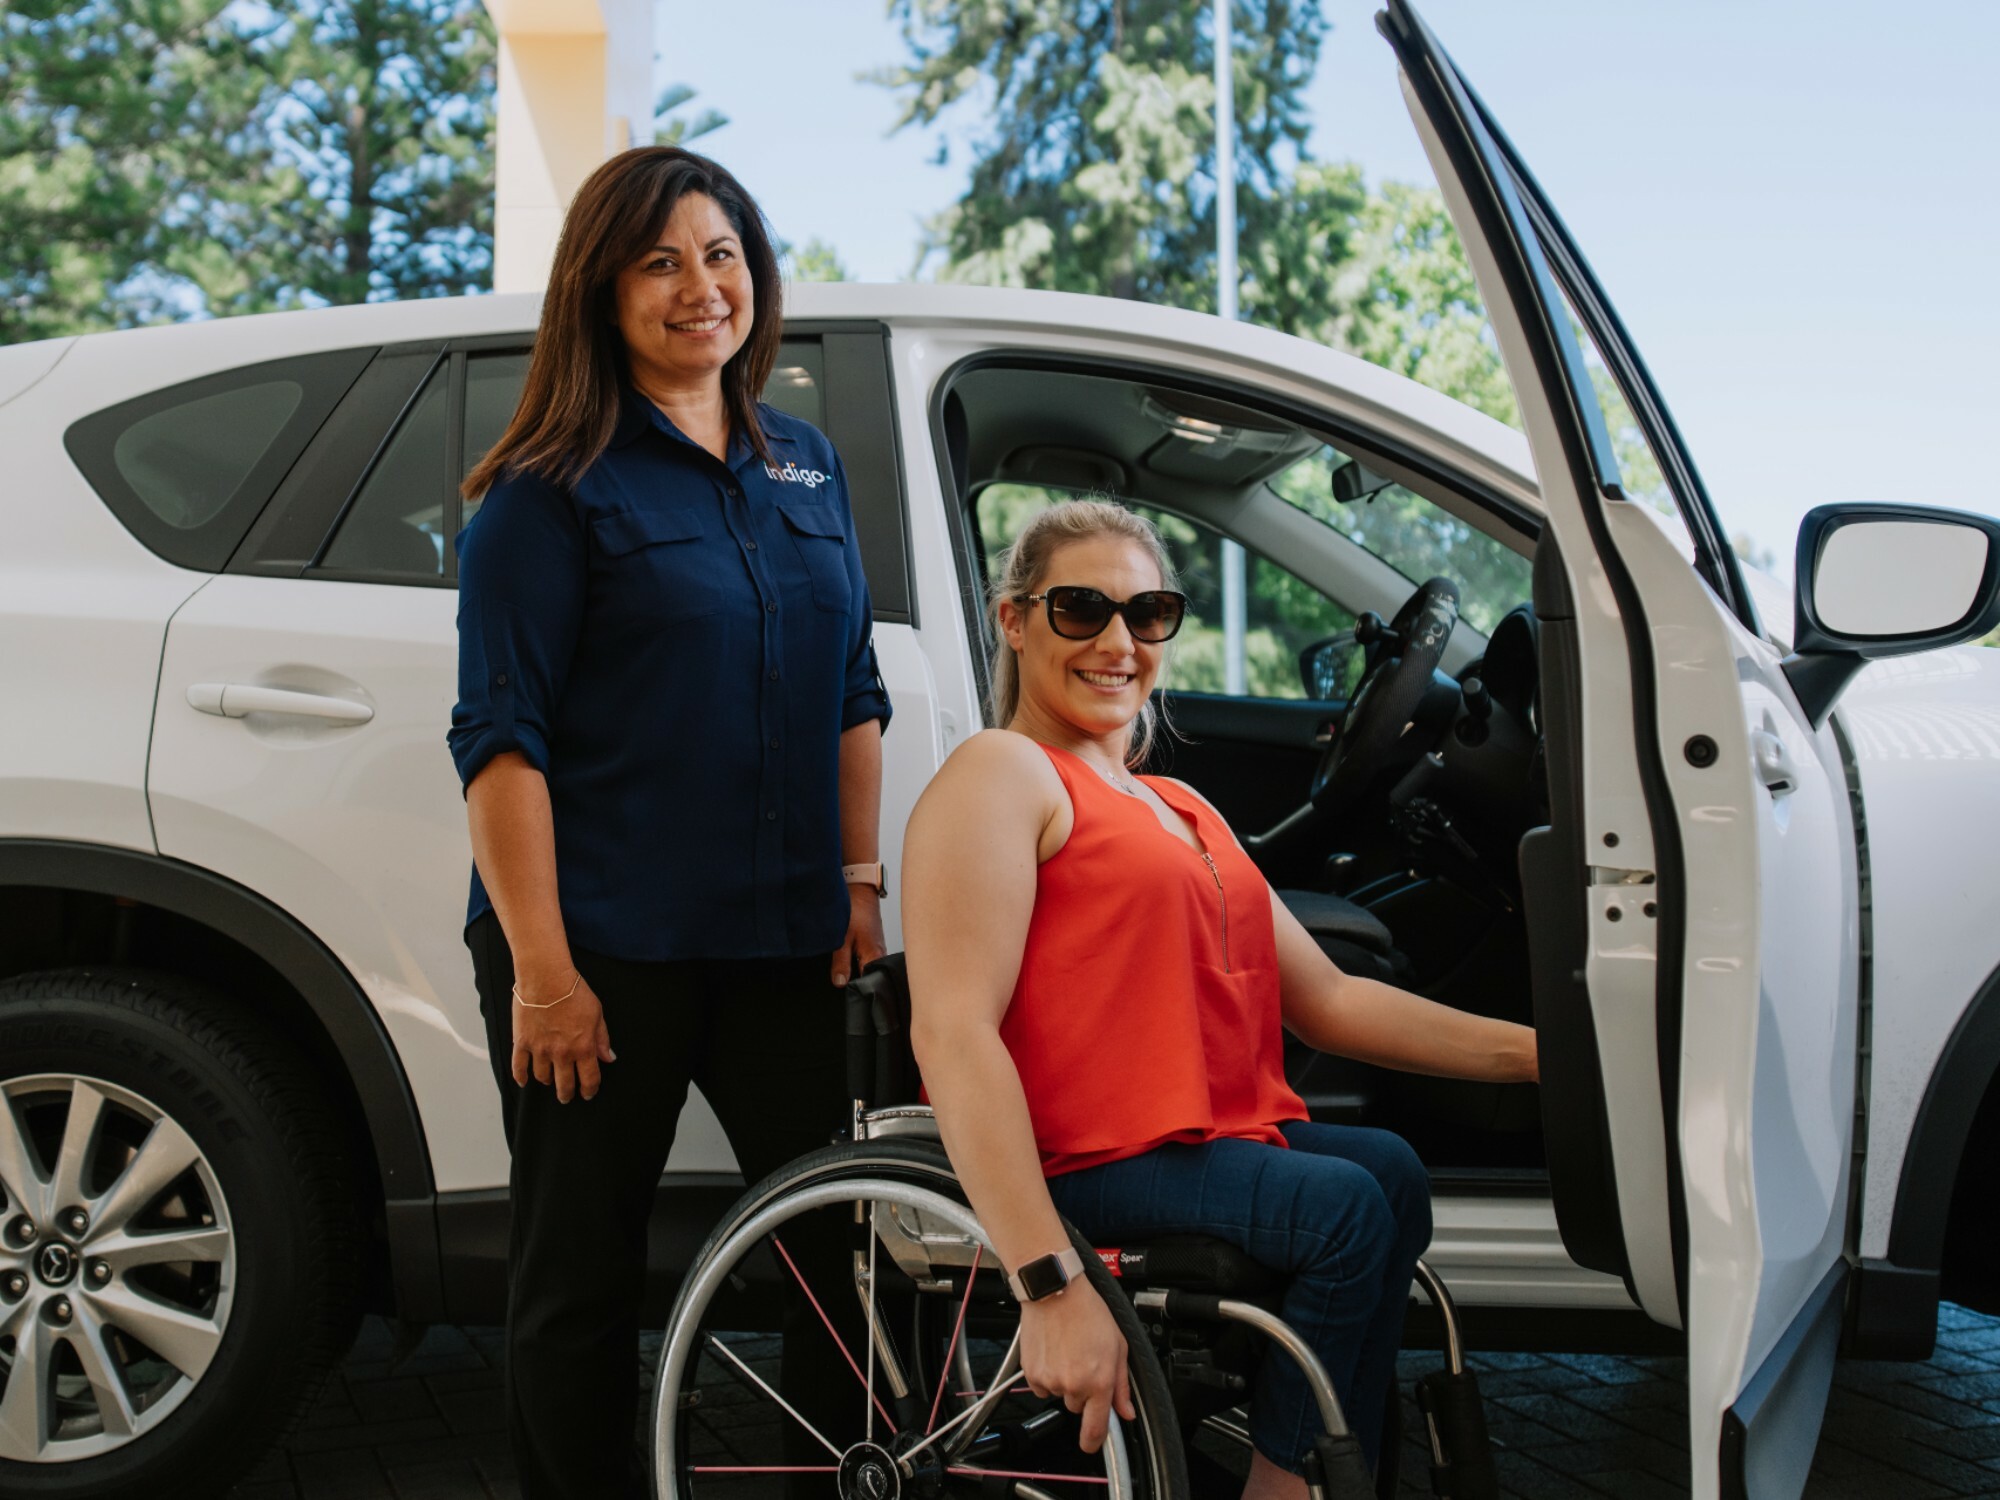 Case study - assistive technology supports Paralympian, Sarah, to live life